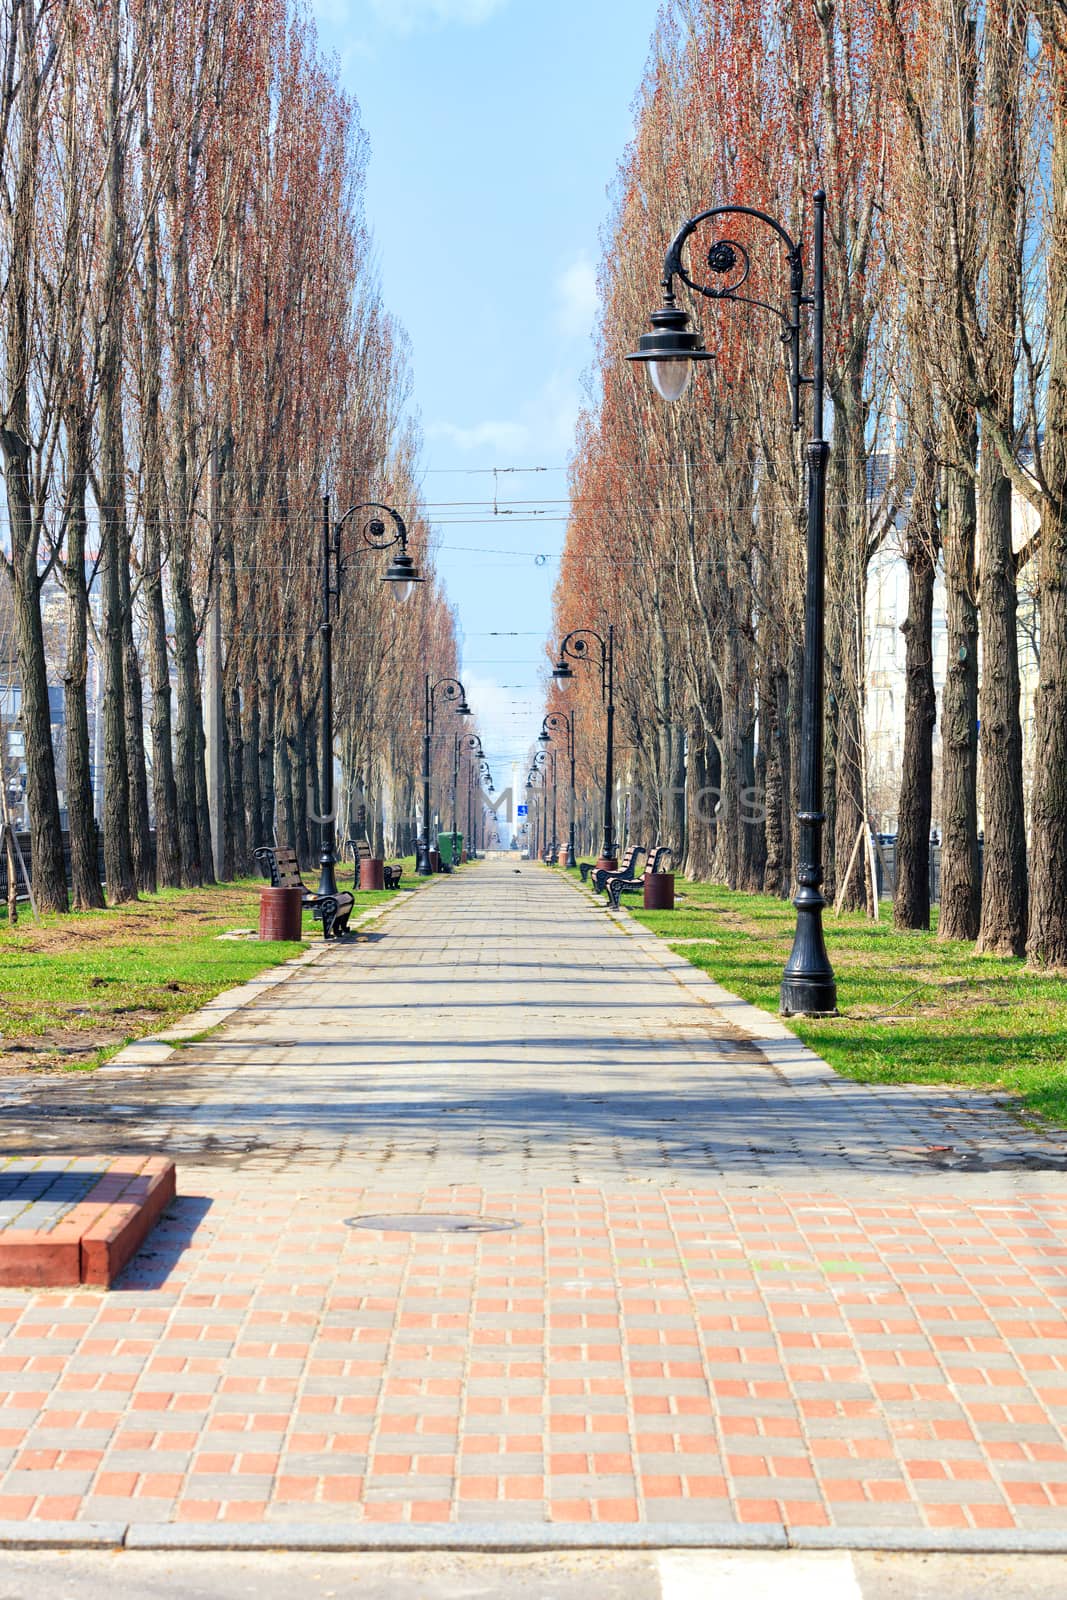 Shevchenko Boulevard in Kyiv goes into the distance, in early spring. Alley of high poplars with vintage street lamps and wooden benches along the path, paved with paving slabs, vertical image.